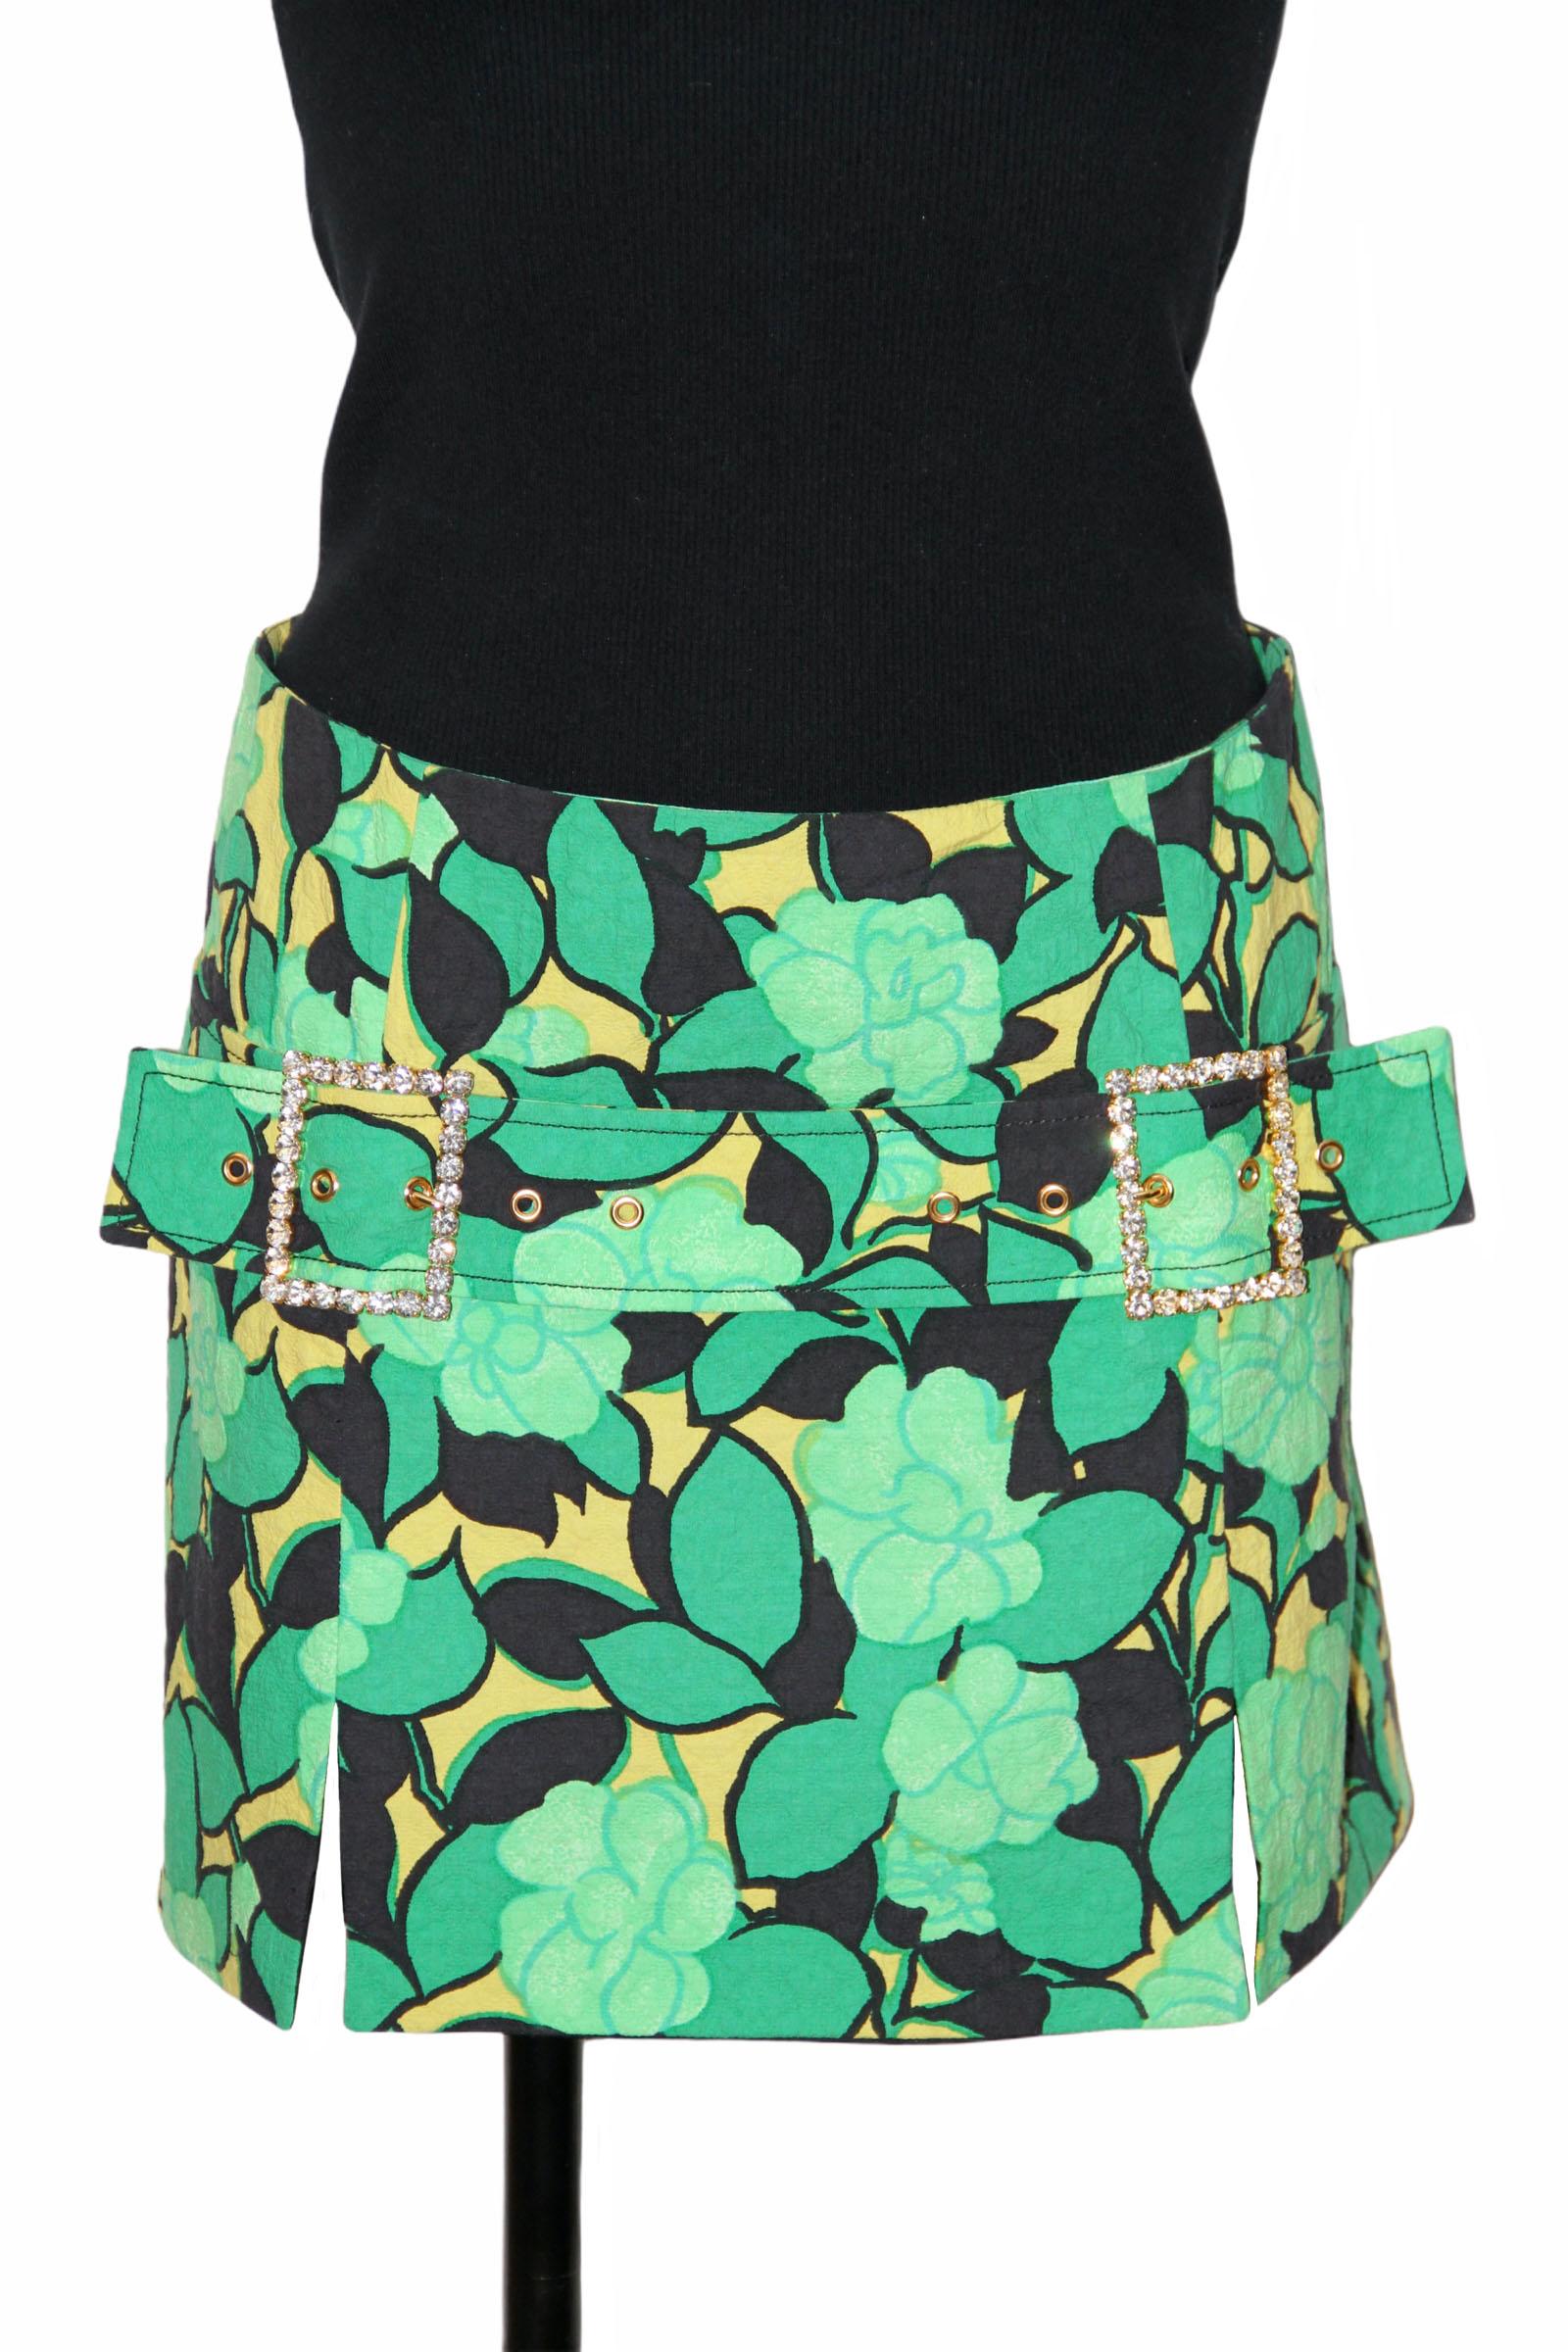 Dolce & Gabbana Black and Green Mini Skirt with Strass Buckles 1